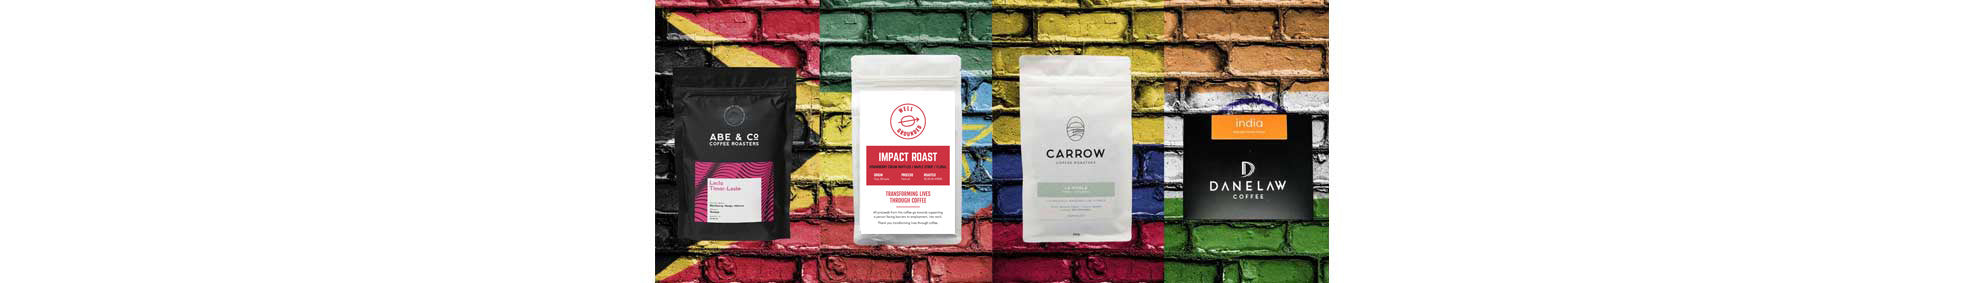 June edition of the UKs best coffee subscription and gift service